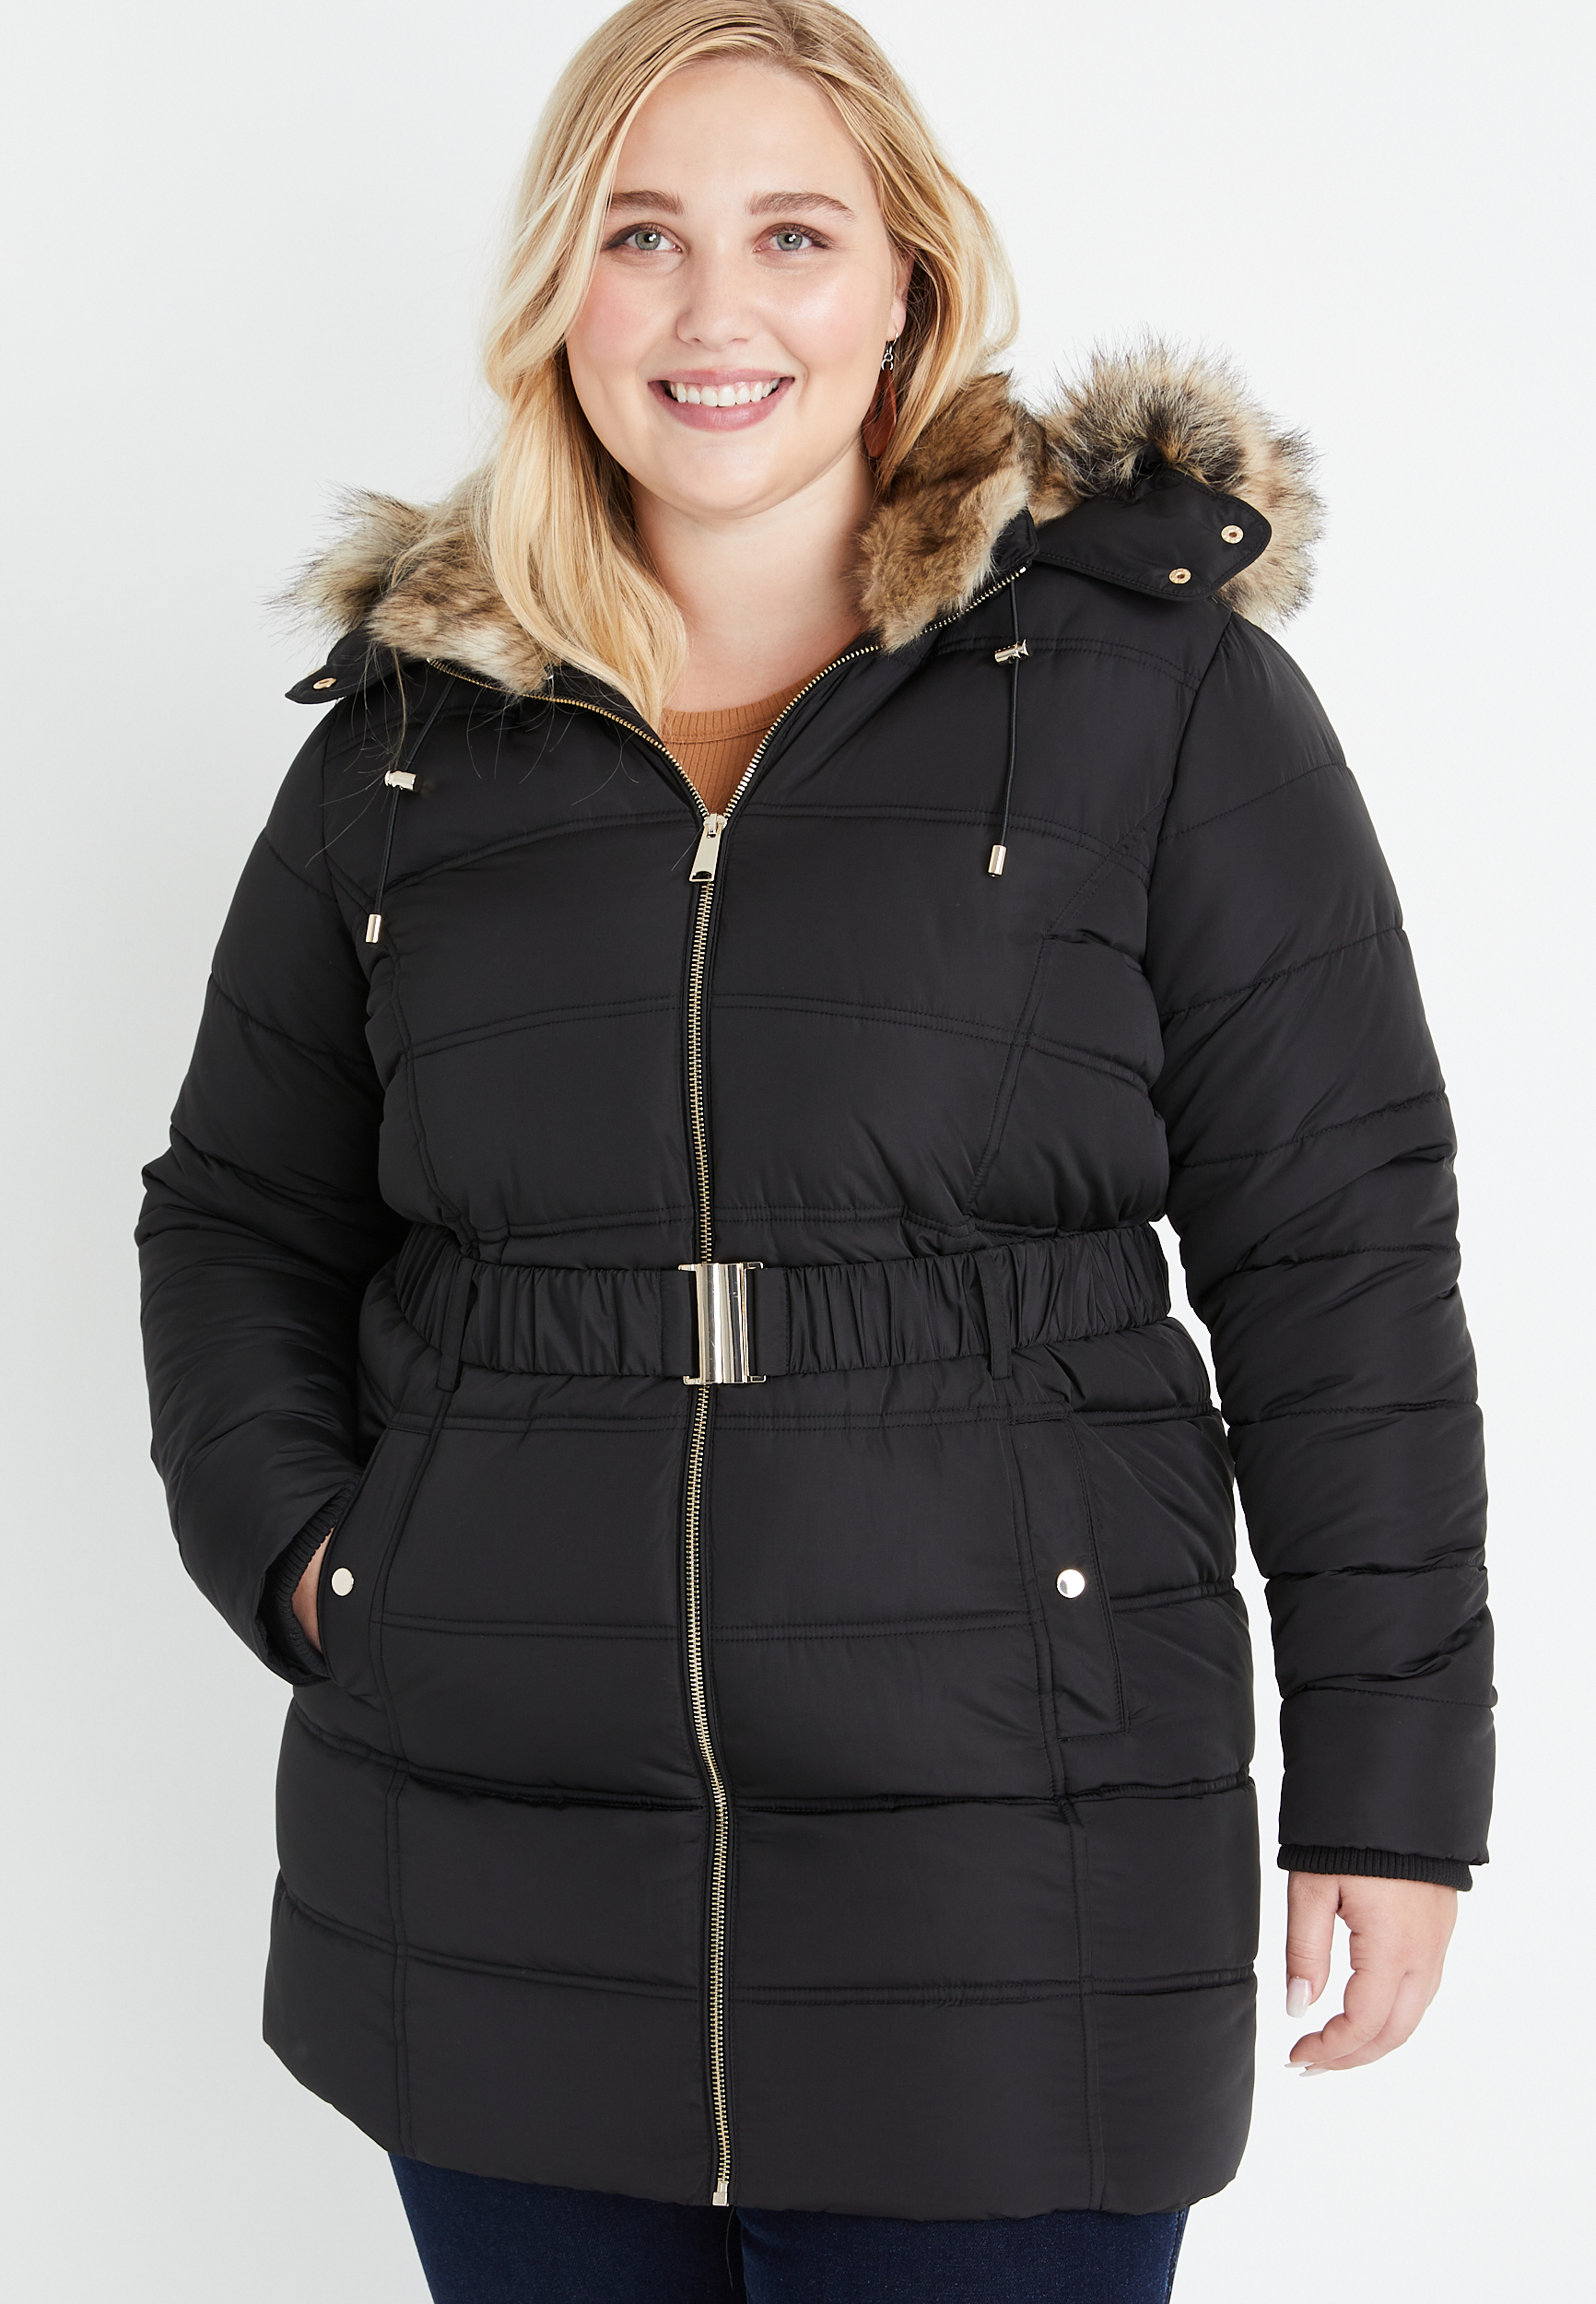 Plus Size Black Long Puffer Jacket | maurices